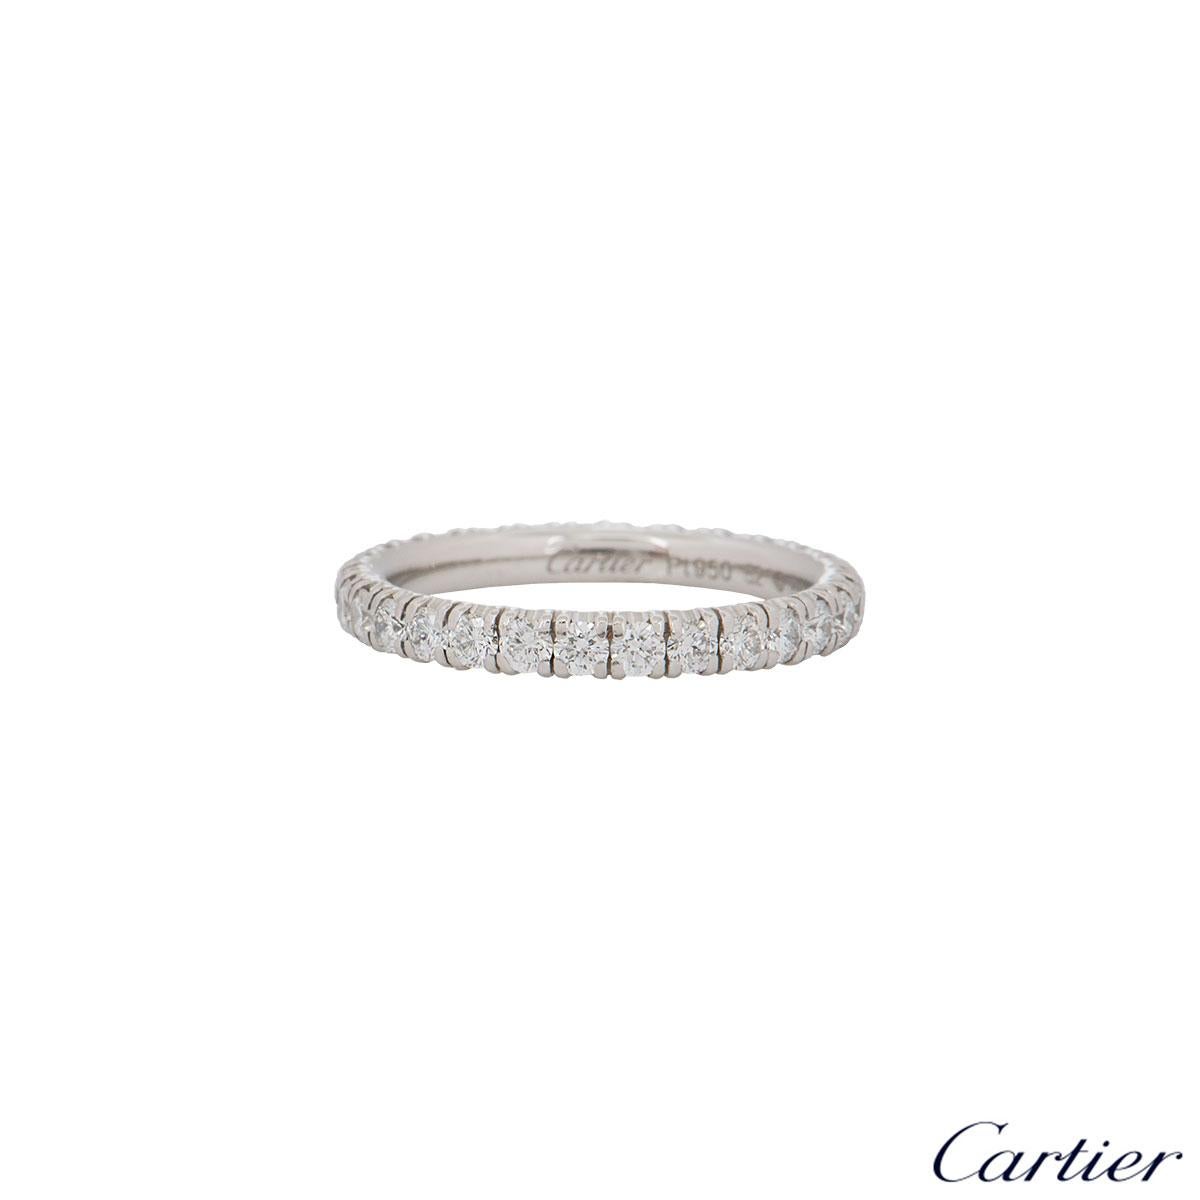 An alluring 18k white gold Cartier diamond eternity ring from the Étincelle De Cartier collection. The ring comprises of 29 round brilliant cut diamonds with a weight of 0.93ct in a shared 4 claw setting all the way round. The ring is a size UK M,